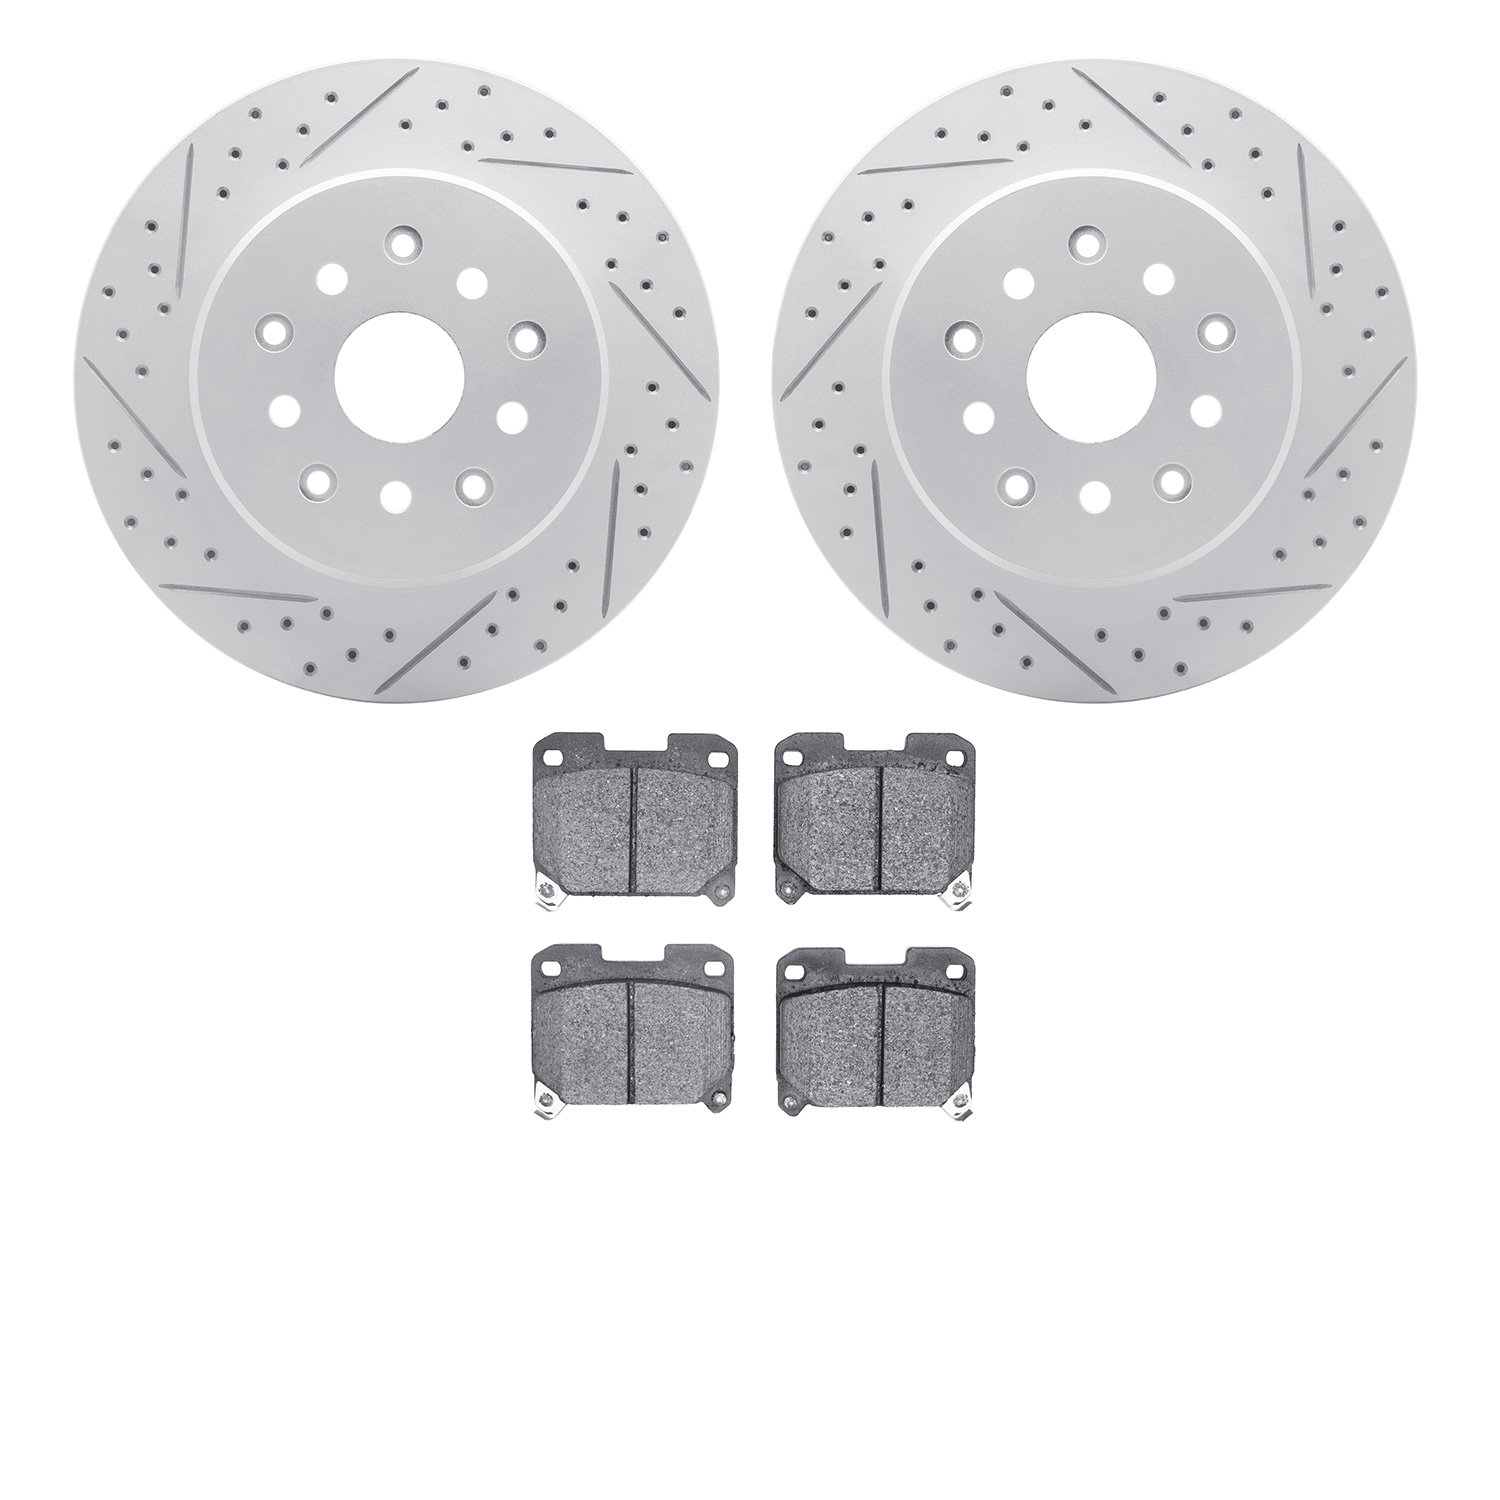 2502-76011 Geoperformance Drilled/Slotted Rotors w/5000 Advanced Brake Pads Kit, 1993-1998 Lexus/Toyota/Scion, Position: Rear